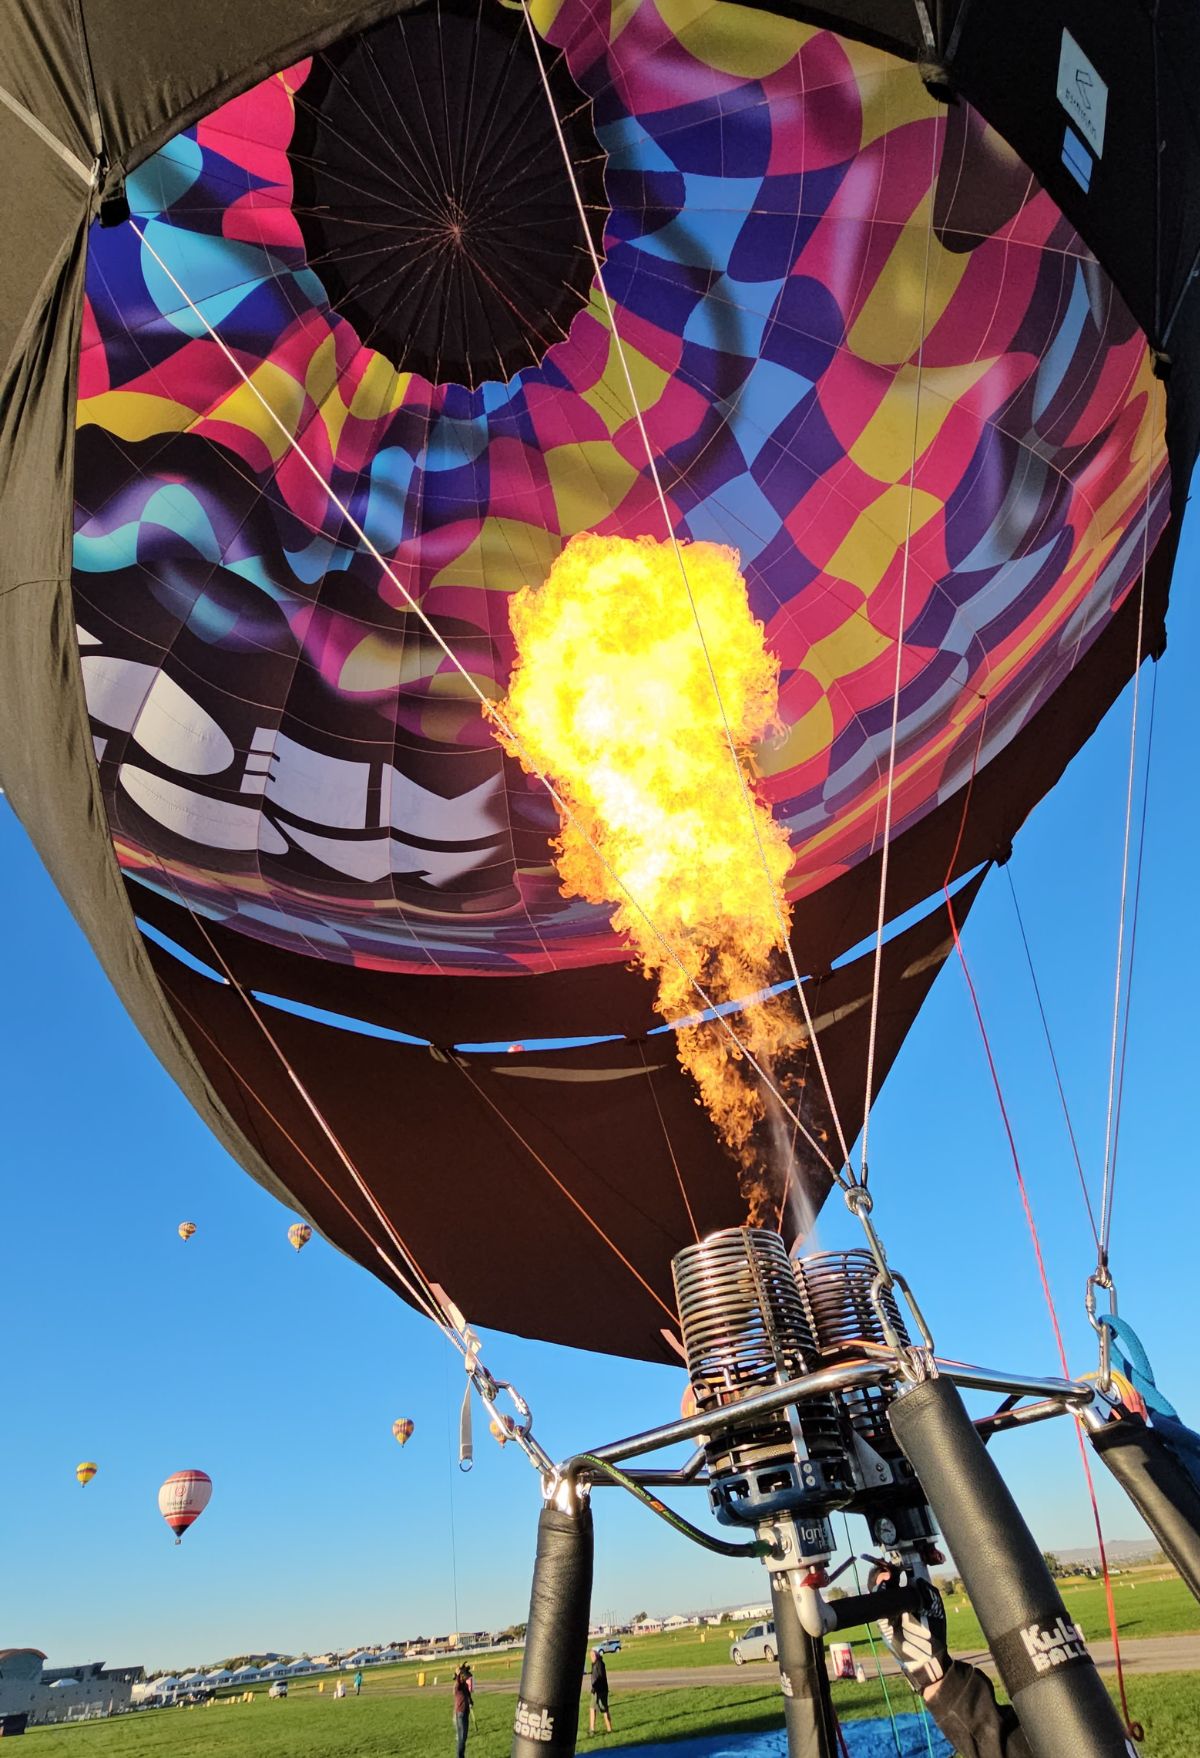 A hot air balloon with flames coming out of it.